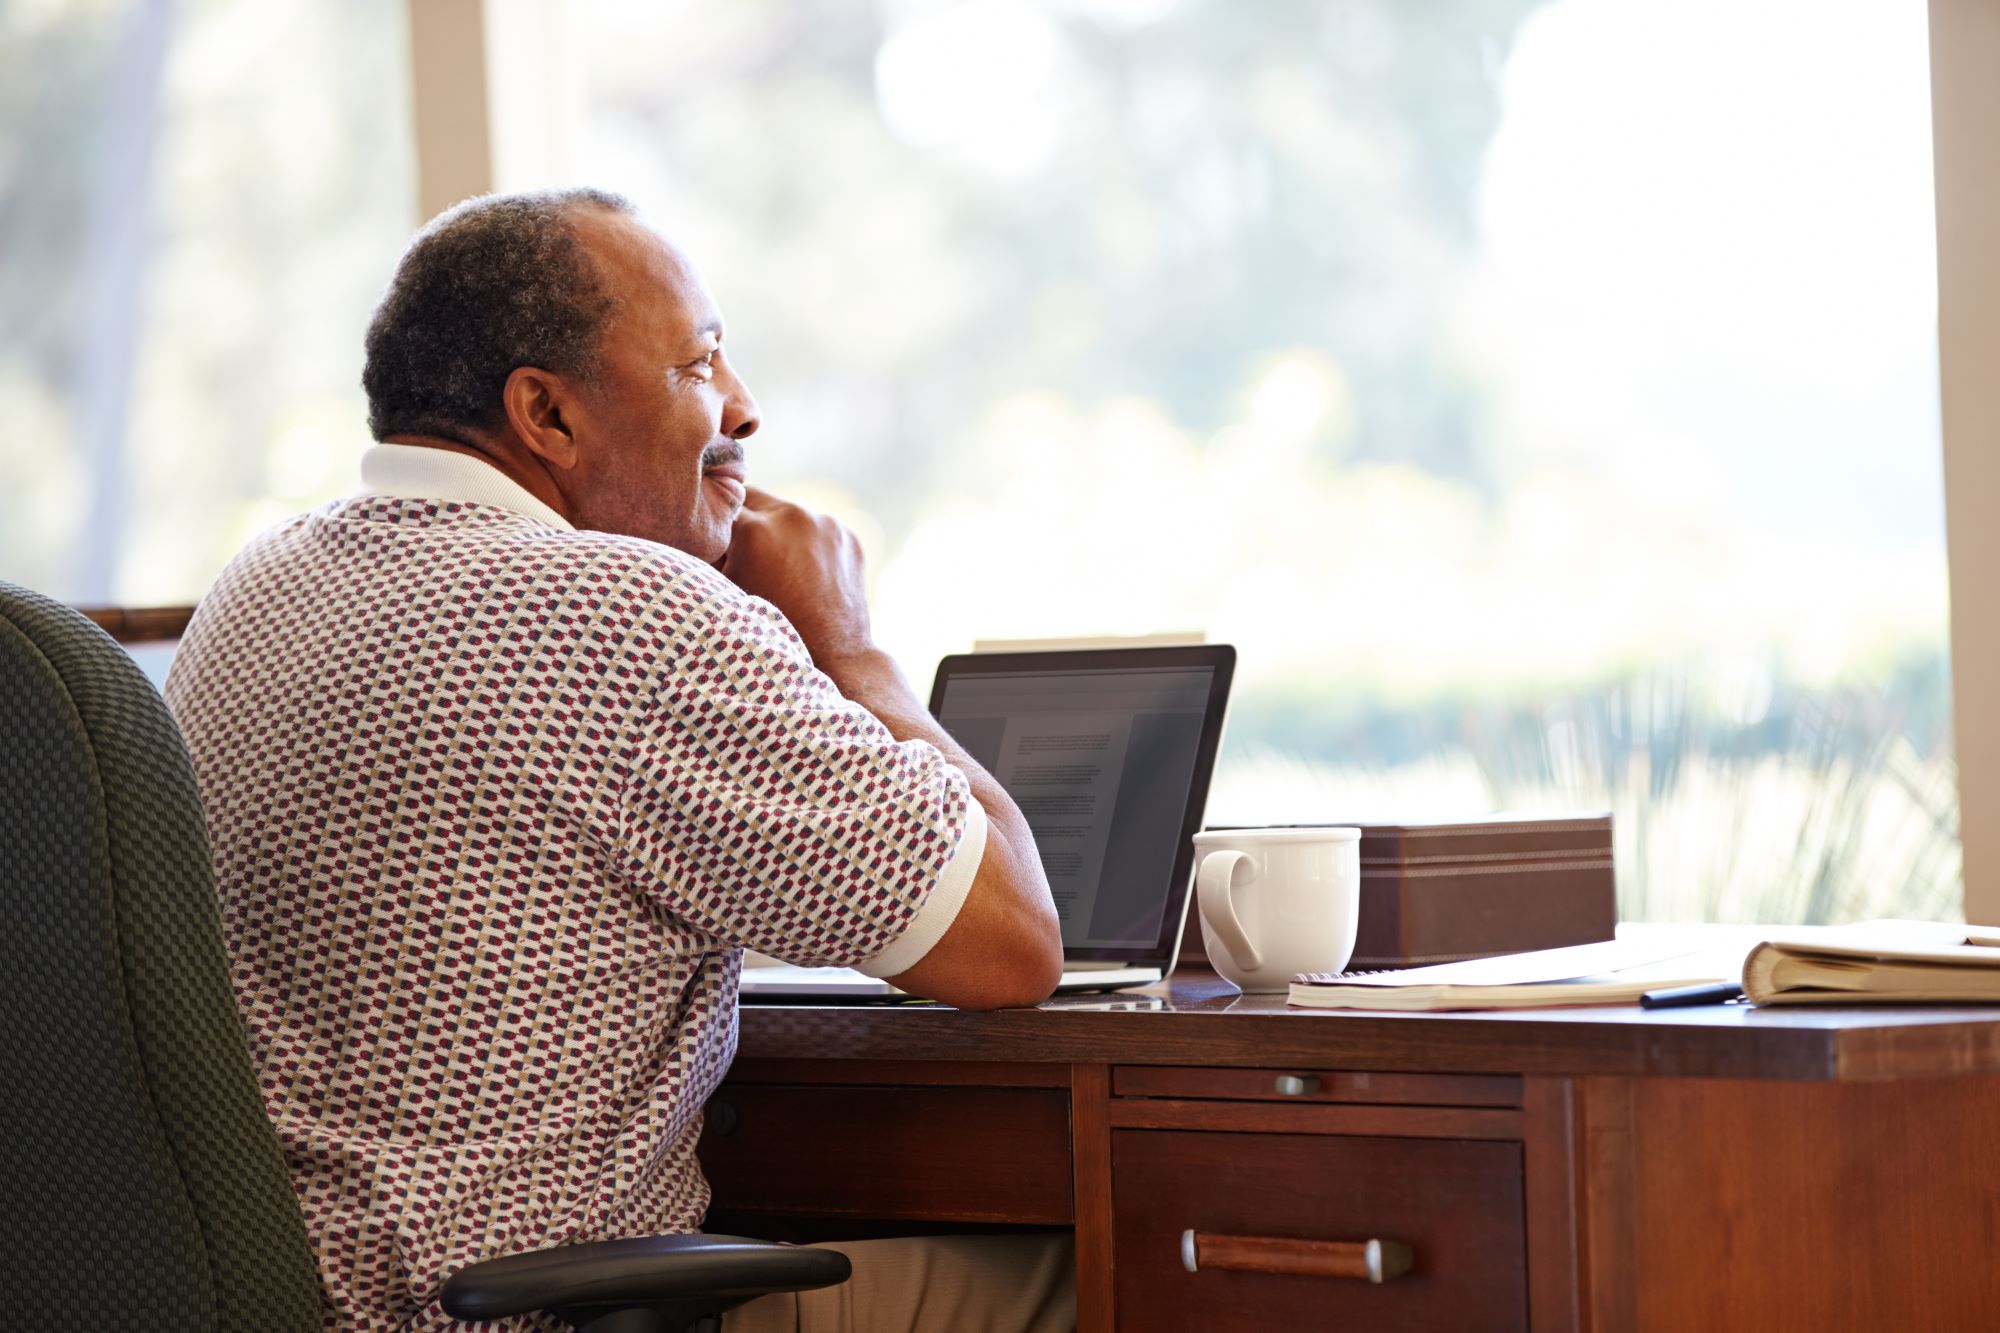 African American over 65 man sitting at desk working